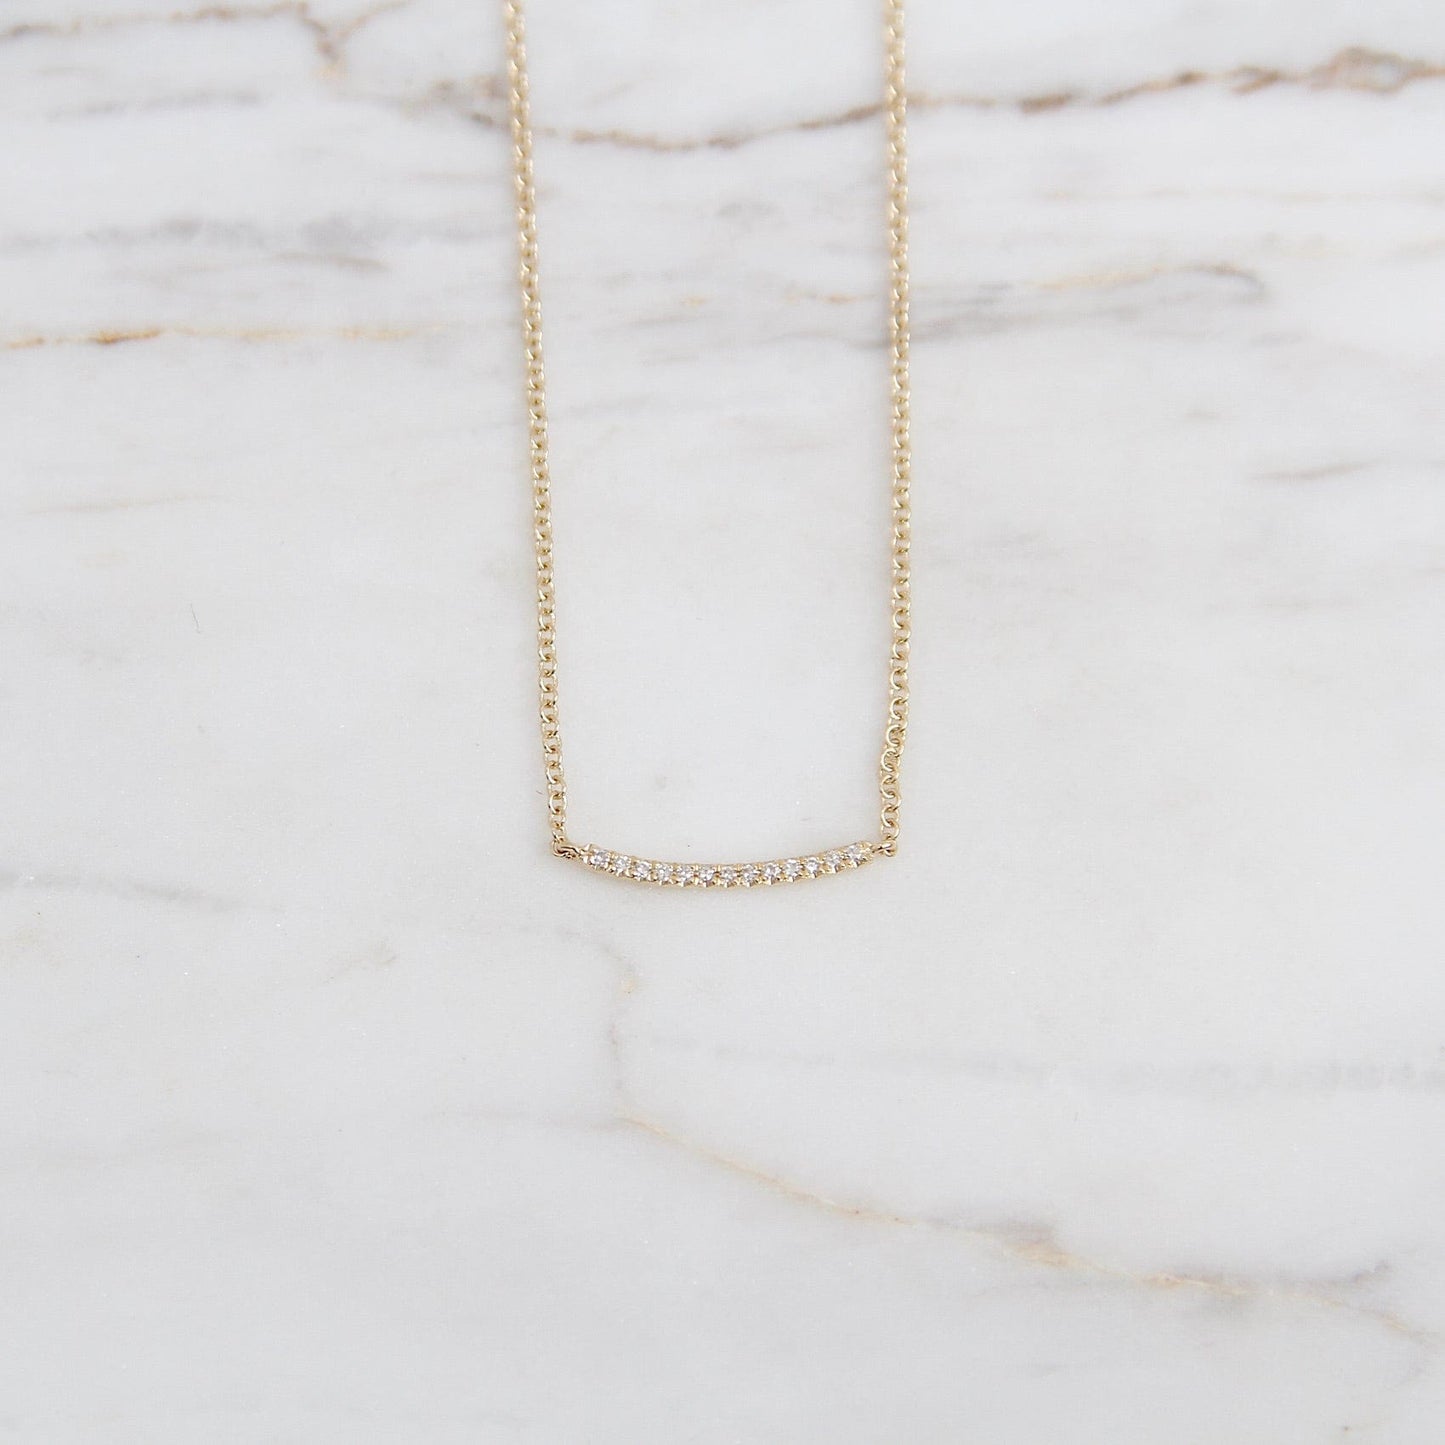 NKL-14K Mini Curved Bar Smile Necklace - 14K Yellow Gold